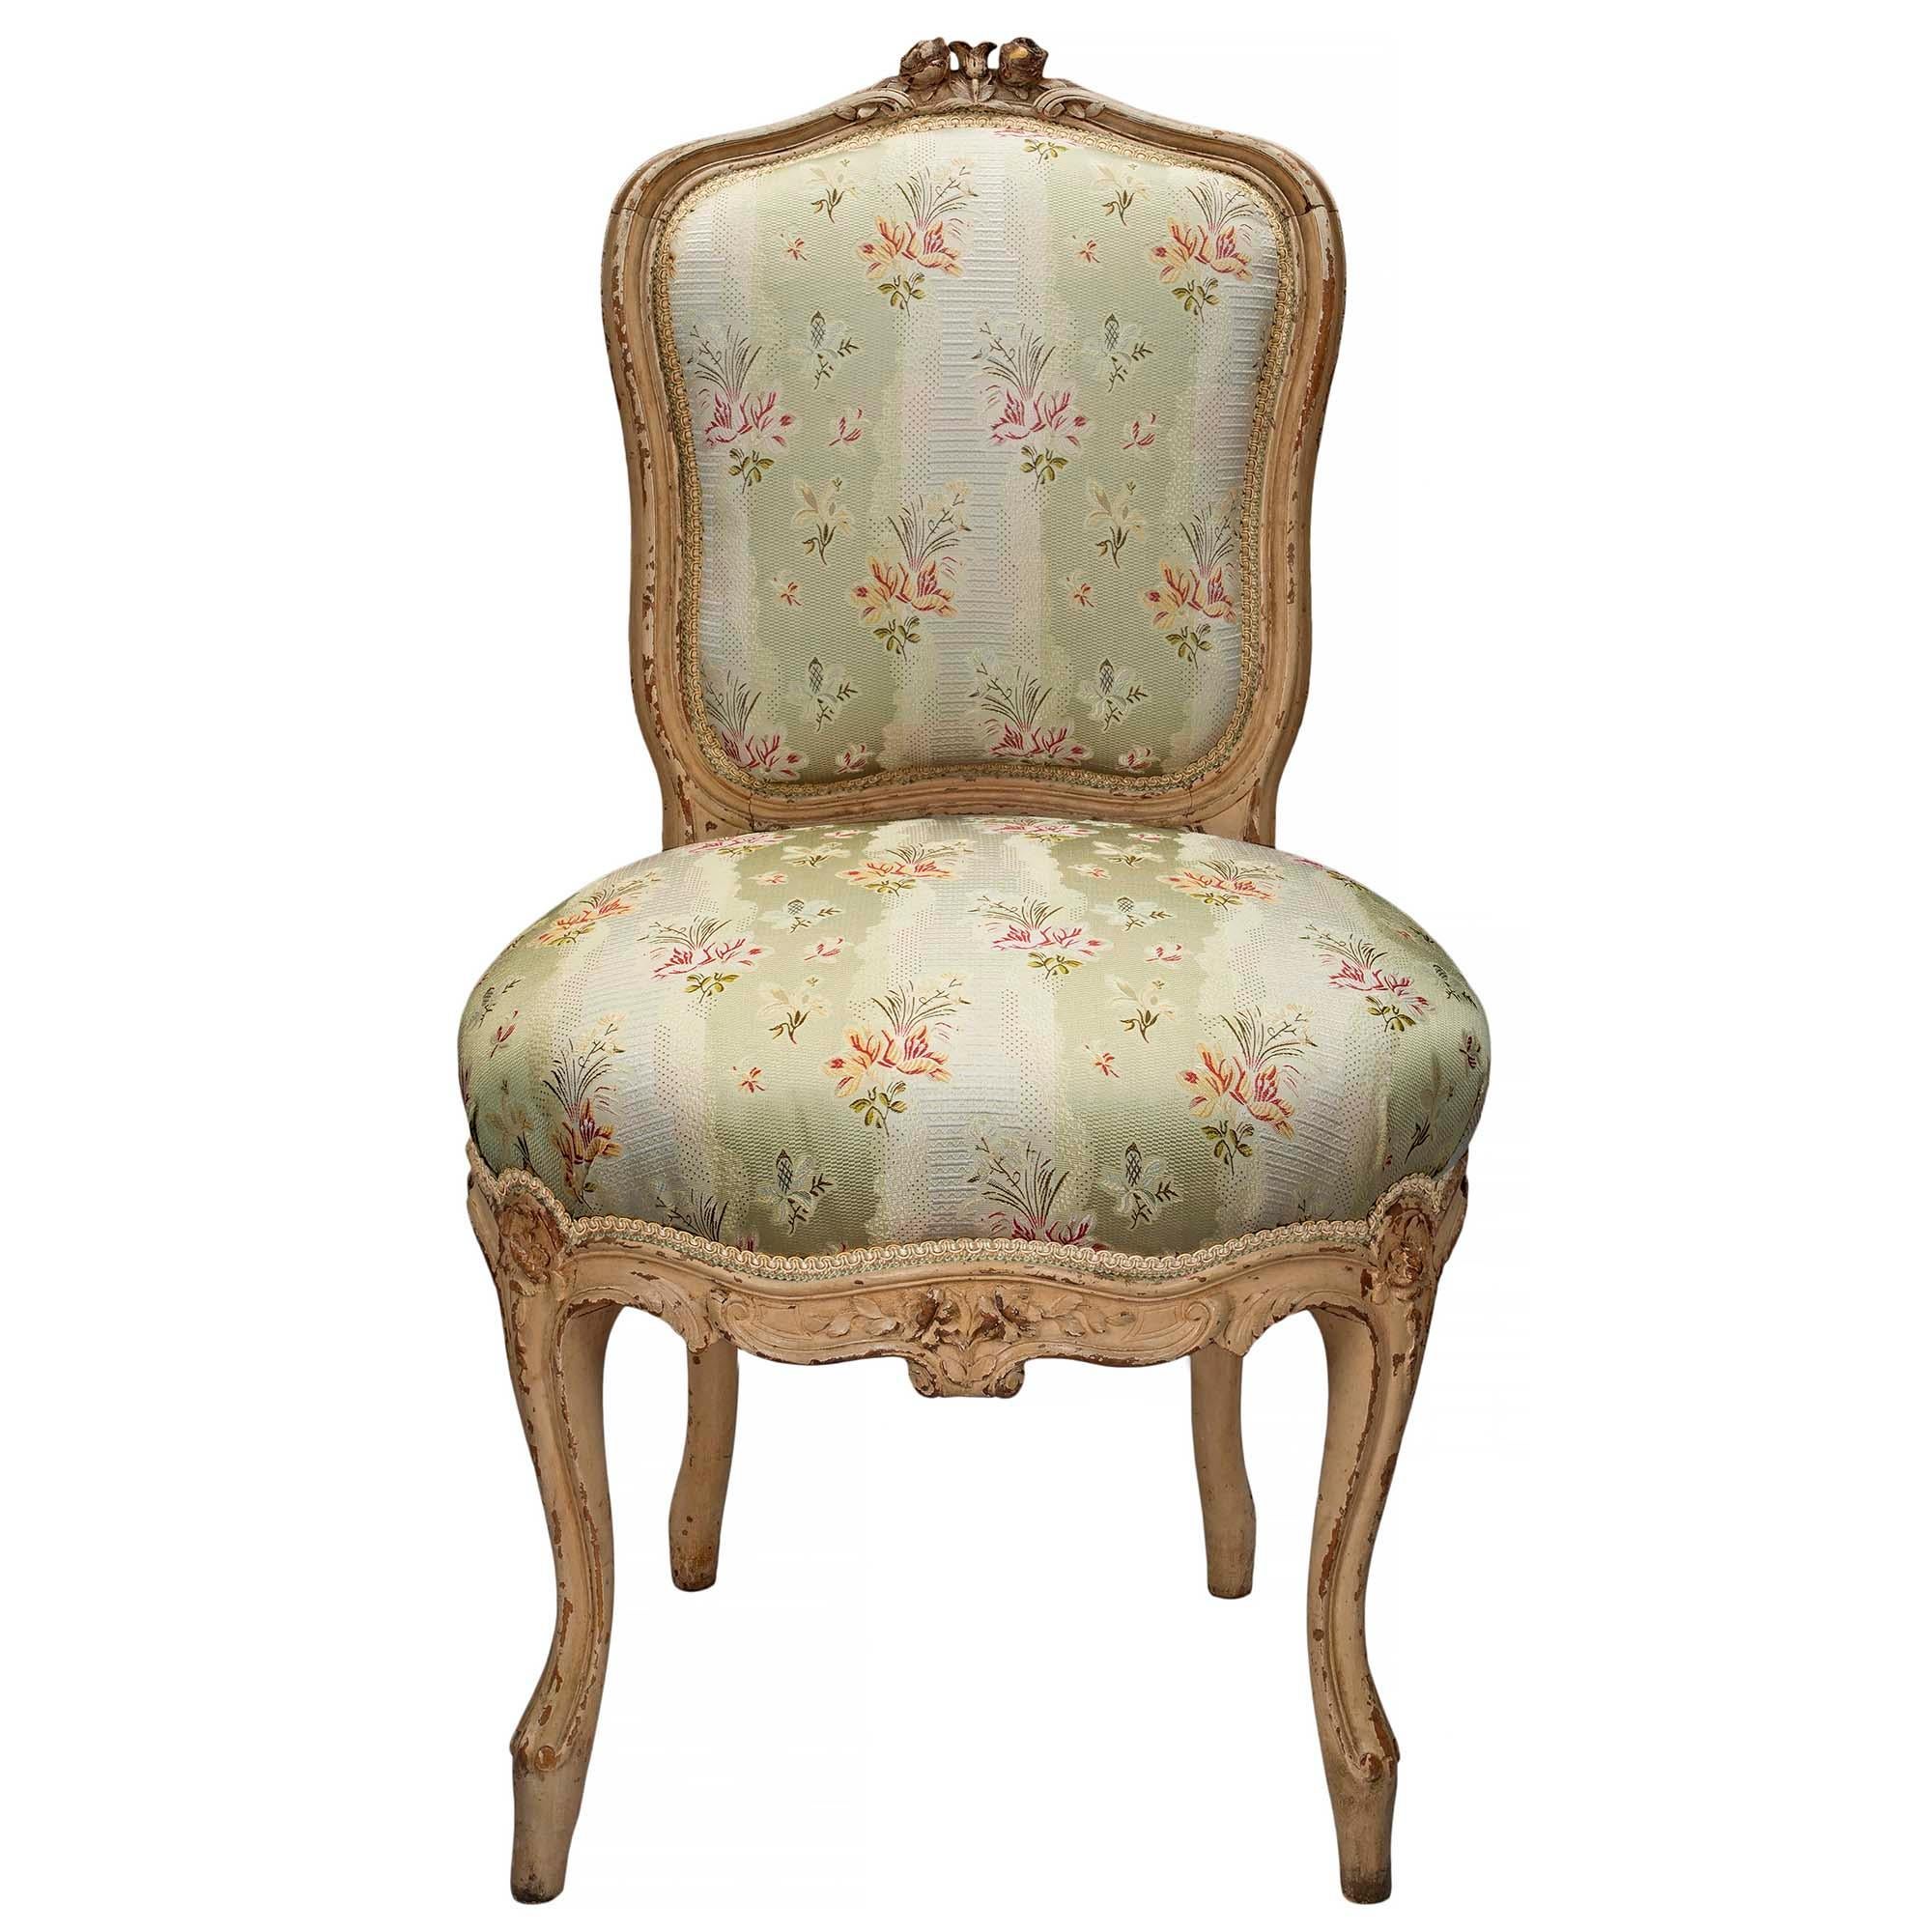 An exquisite and elegant set of four French mid 19th century Louis XV st. richly carved, patinated off-white chairs. The set is raised by 's' scrolled cabriole legs below a scalloped design frieze with carvings of flowers and foliage. The violin